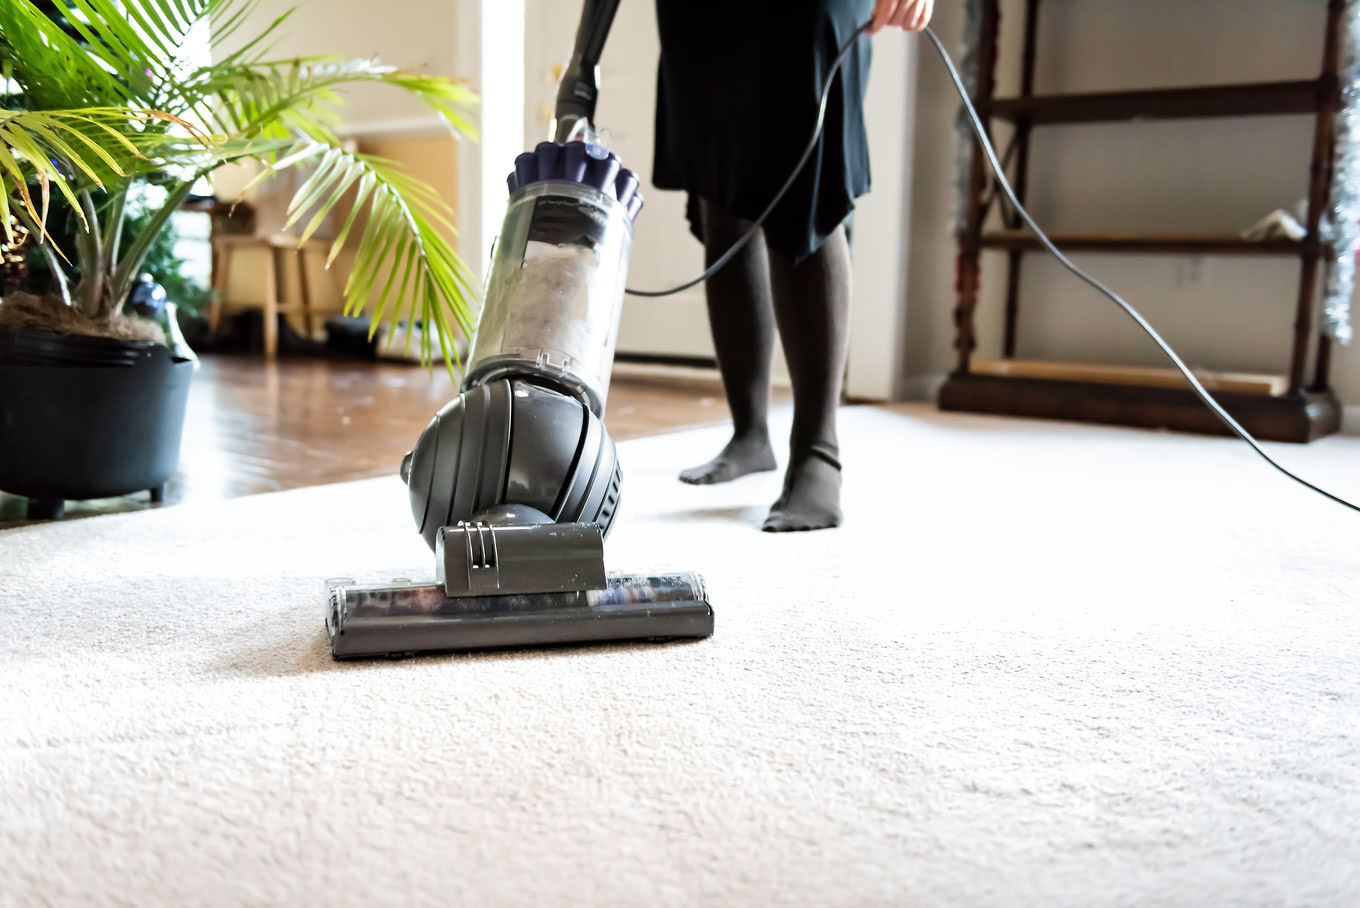 How To Use A Bissell Proheat Carpet Cleaner